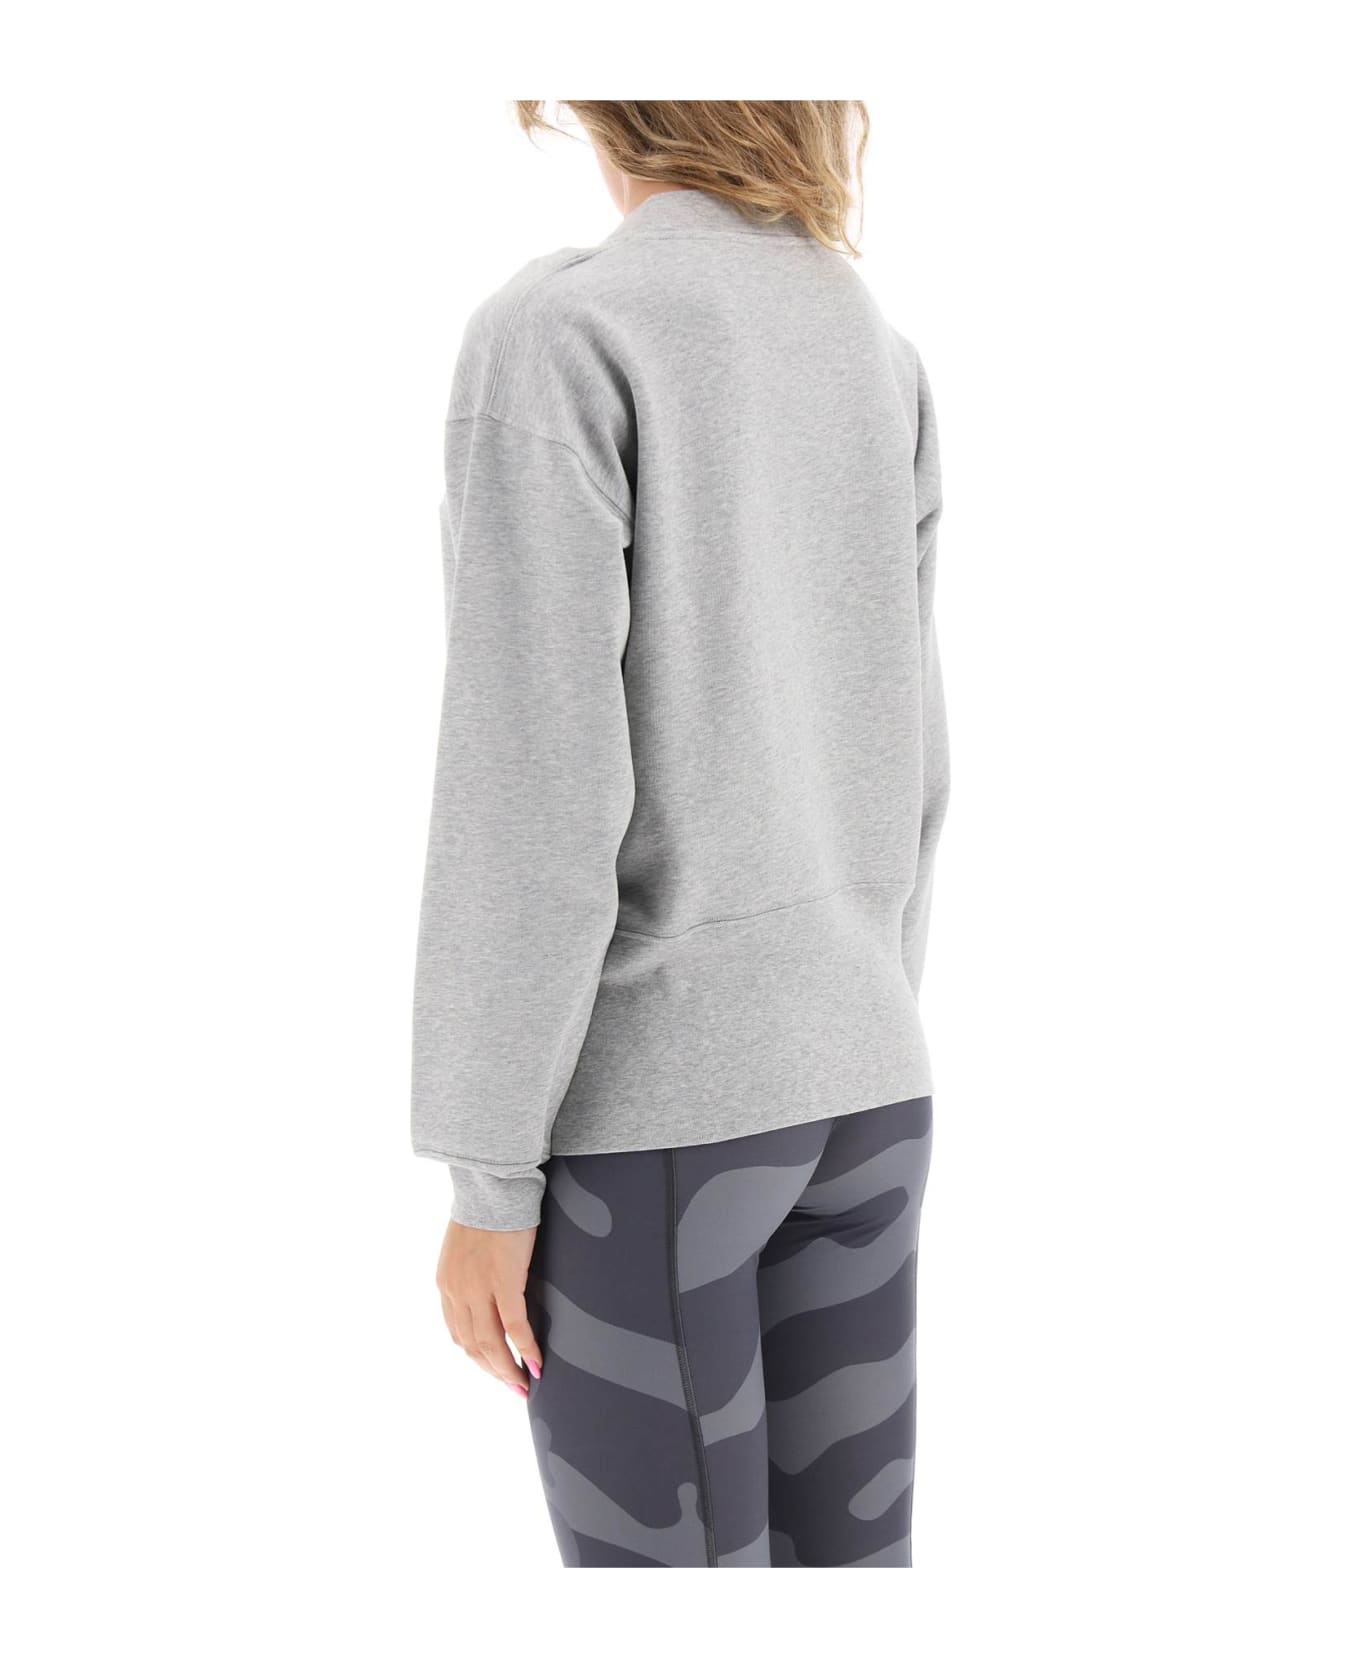 Moncler Sweater With Cut-outs - GREY